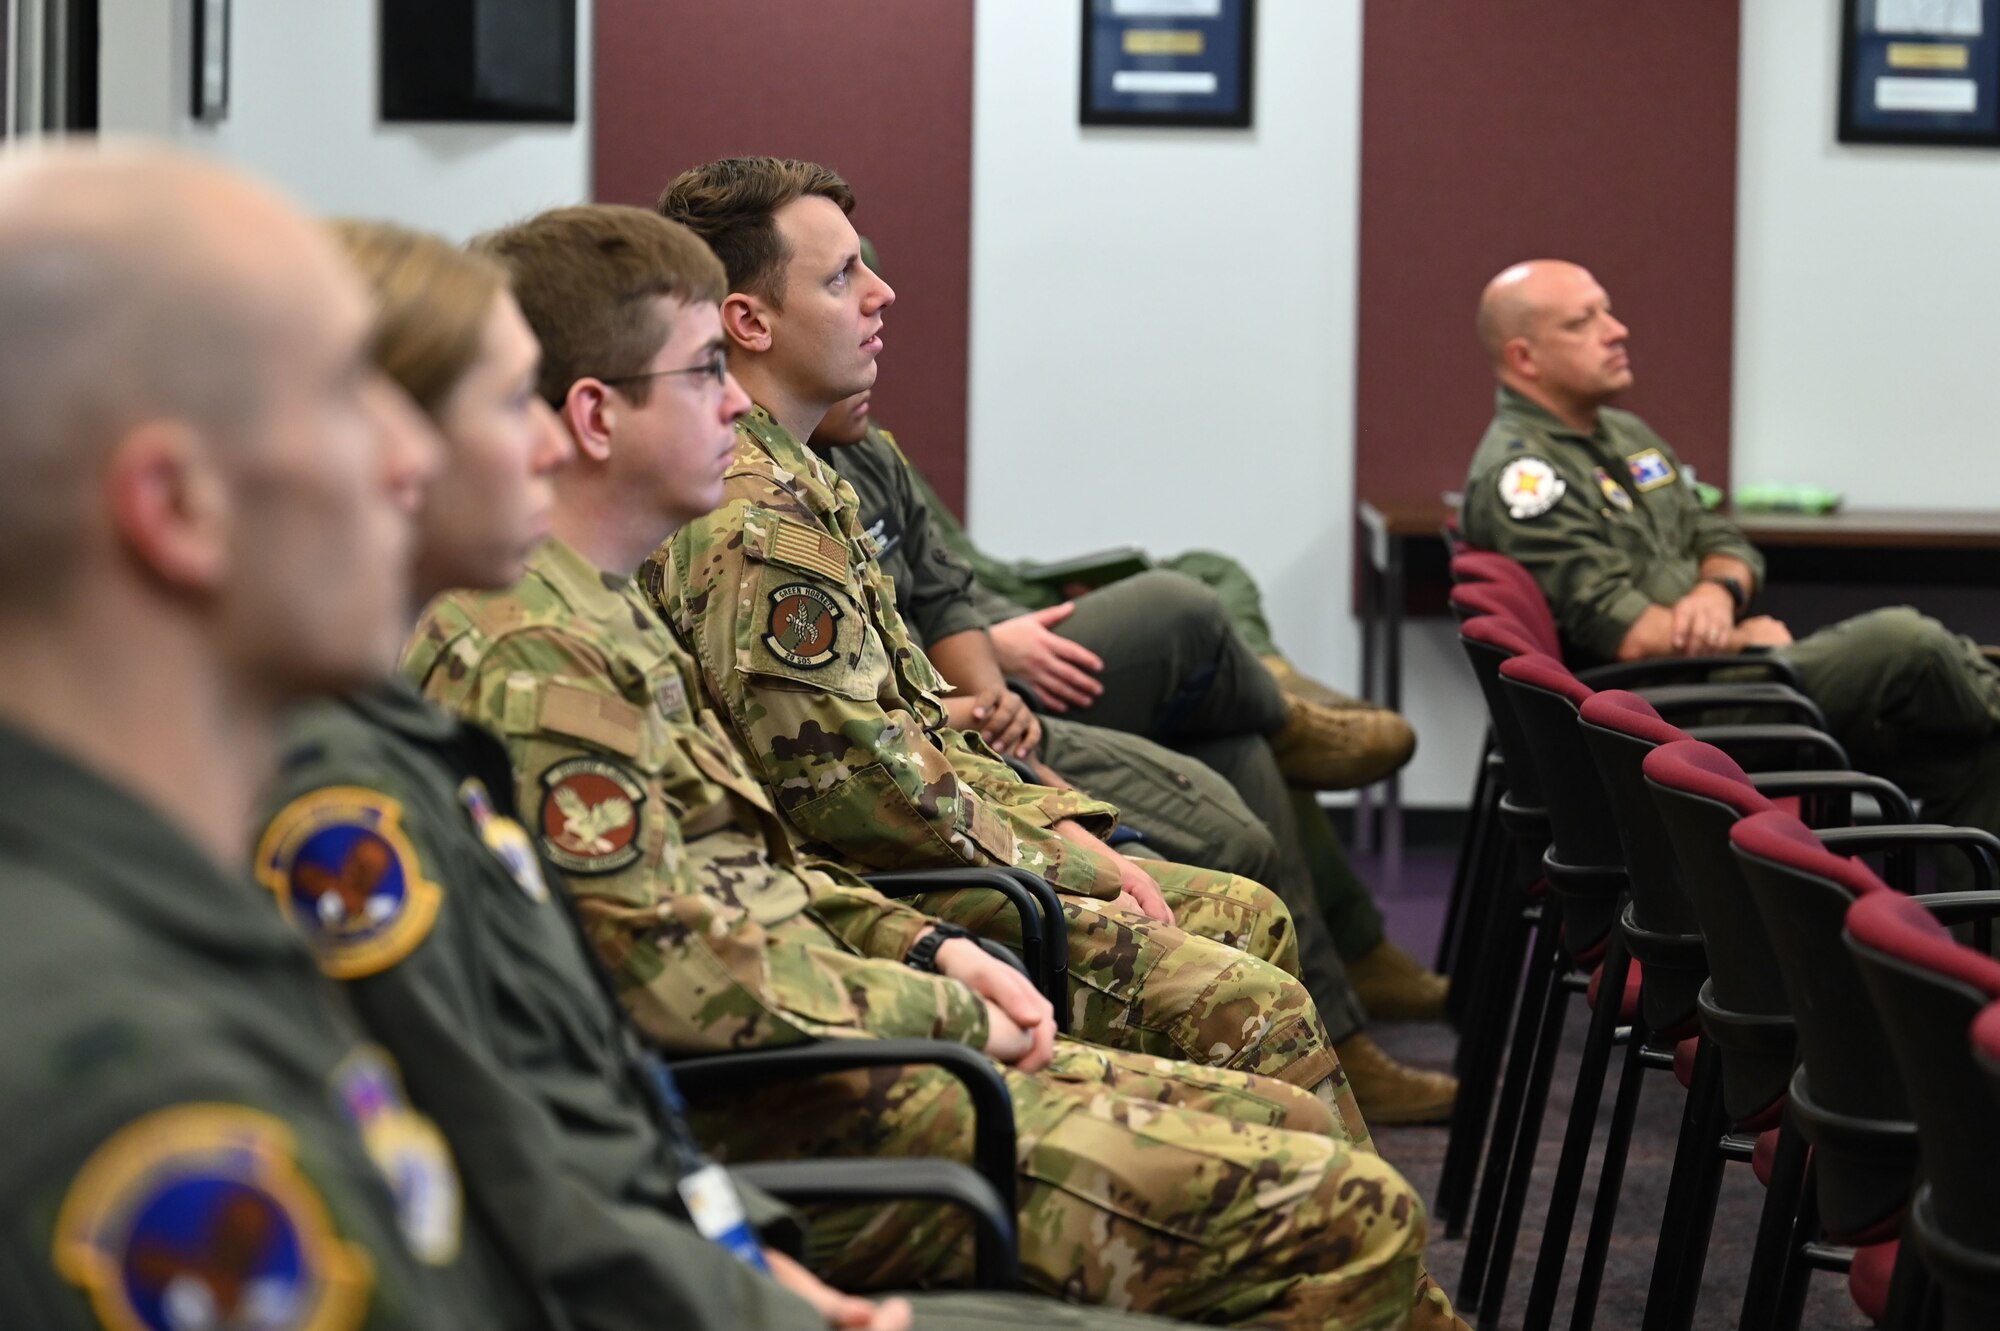 A group of people listen during a briefing.